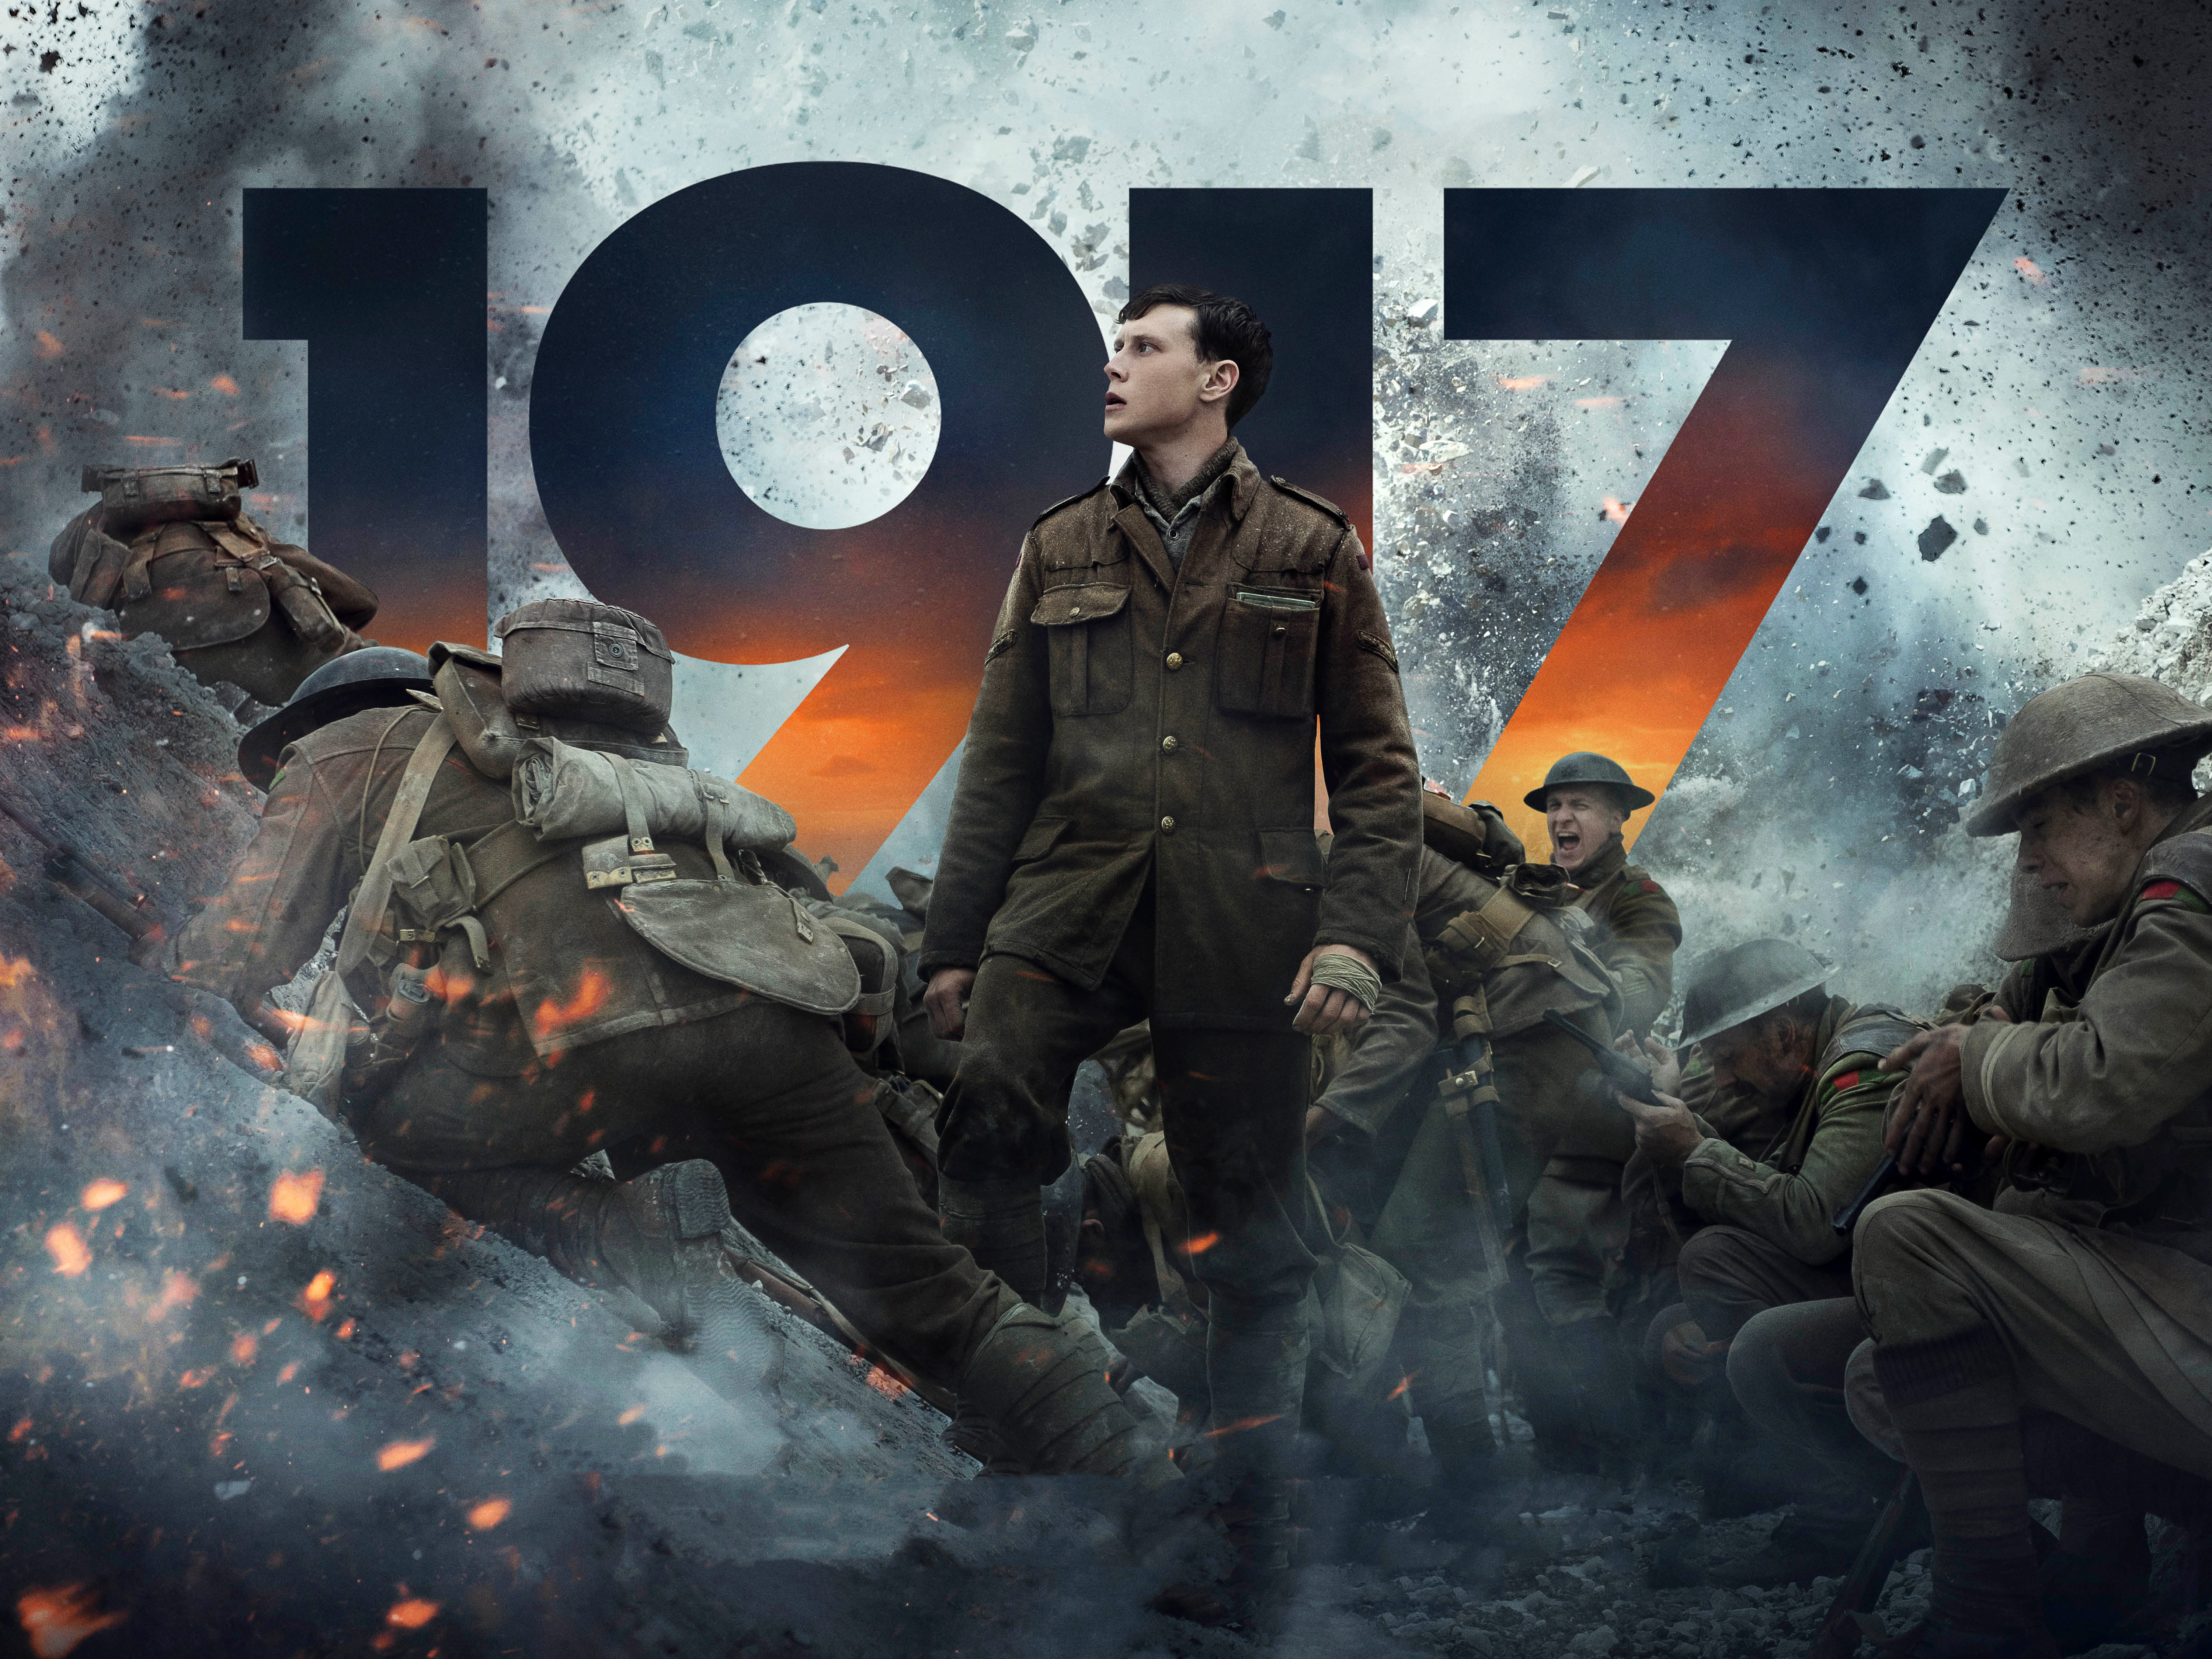 1917 Movie 4K Wallpaper, HD Movies 4K Wallpapers, Images ...